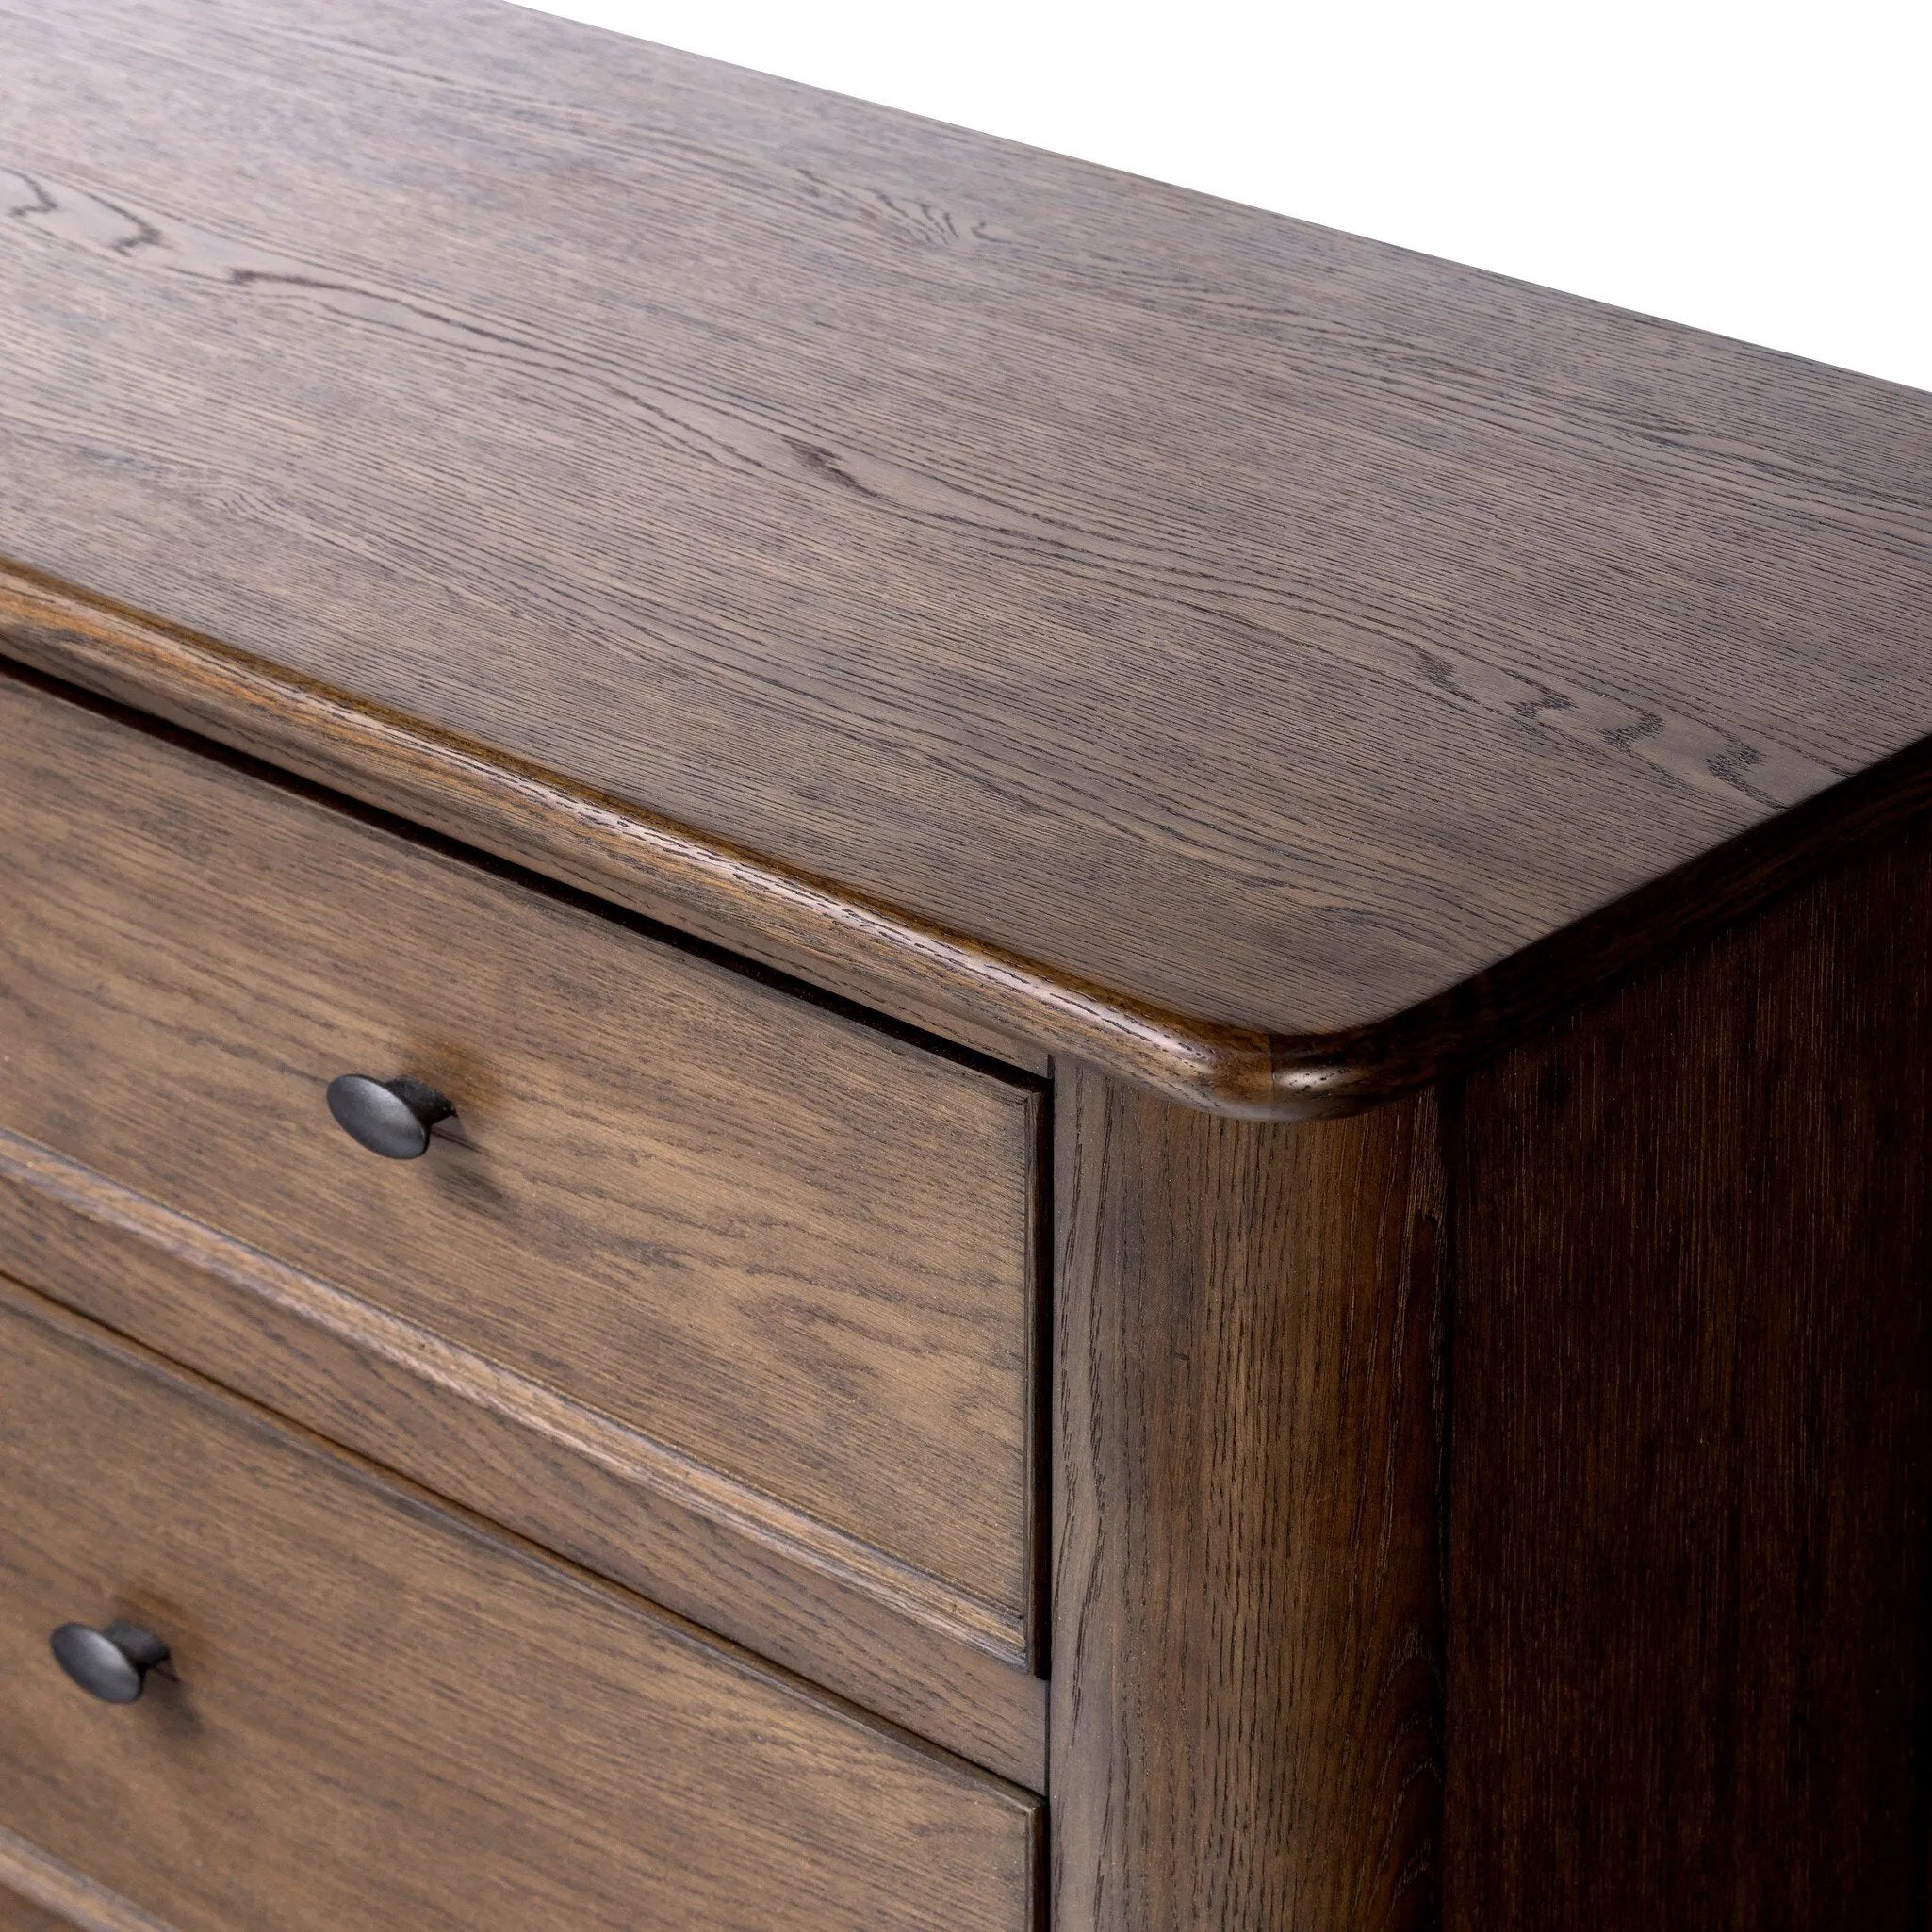 Like an heirloom dresser with three smaller drawers up top, this aged oak design has room for it all. Detailed with an overhang surface, carved edges top to bottom, angled legs and oval drawer pulls finished in dark gunmetal.Collection: Bolto Amethyst Home provides interior design, new home construction design consulting, vintage area rugs, and lighting in the Los Angeles metro area.